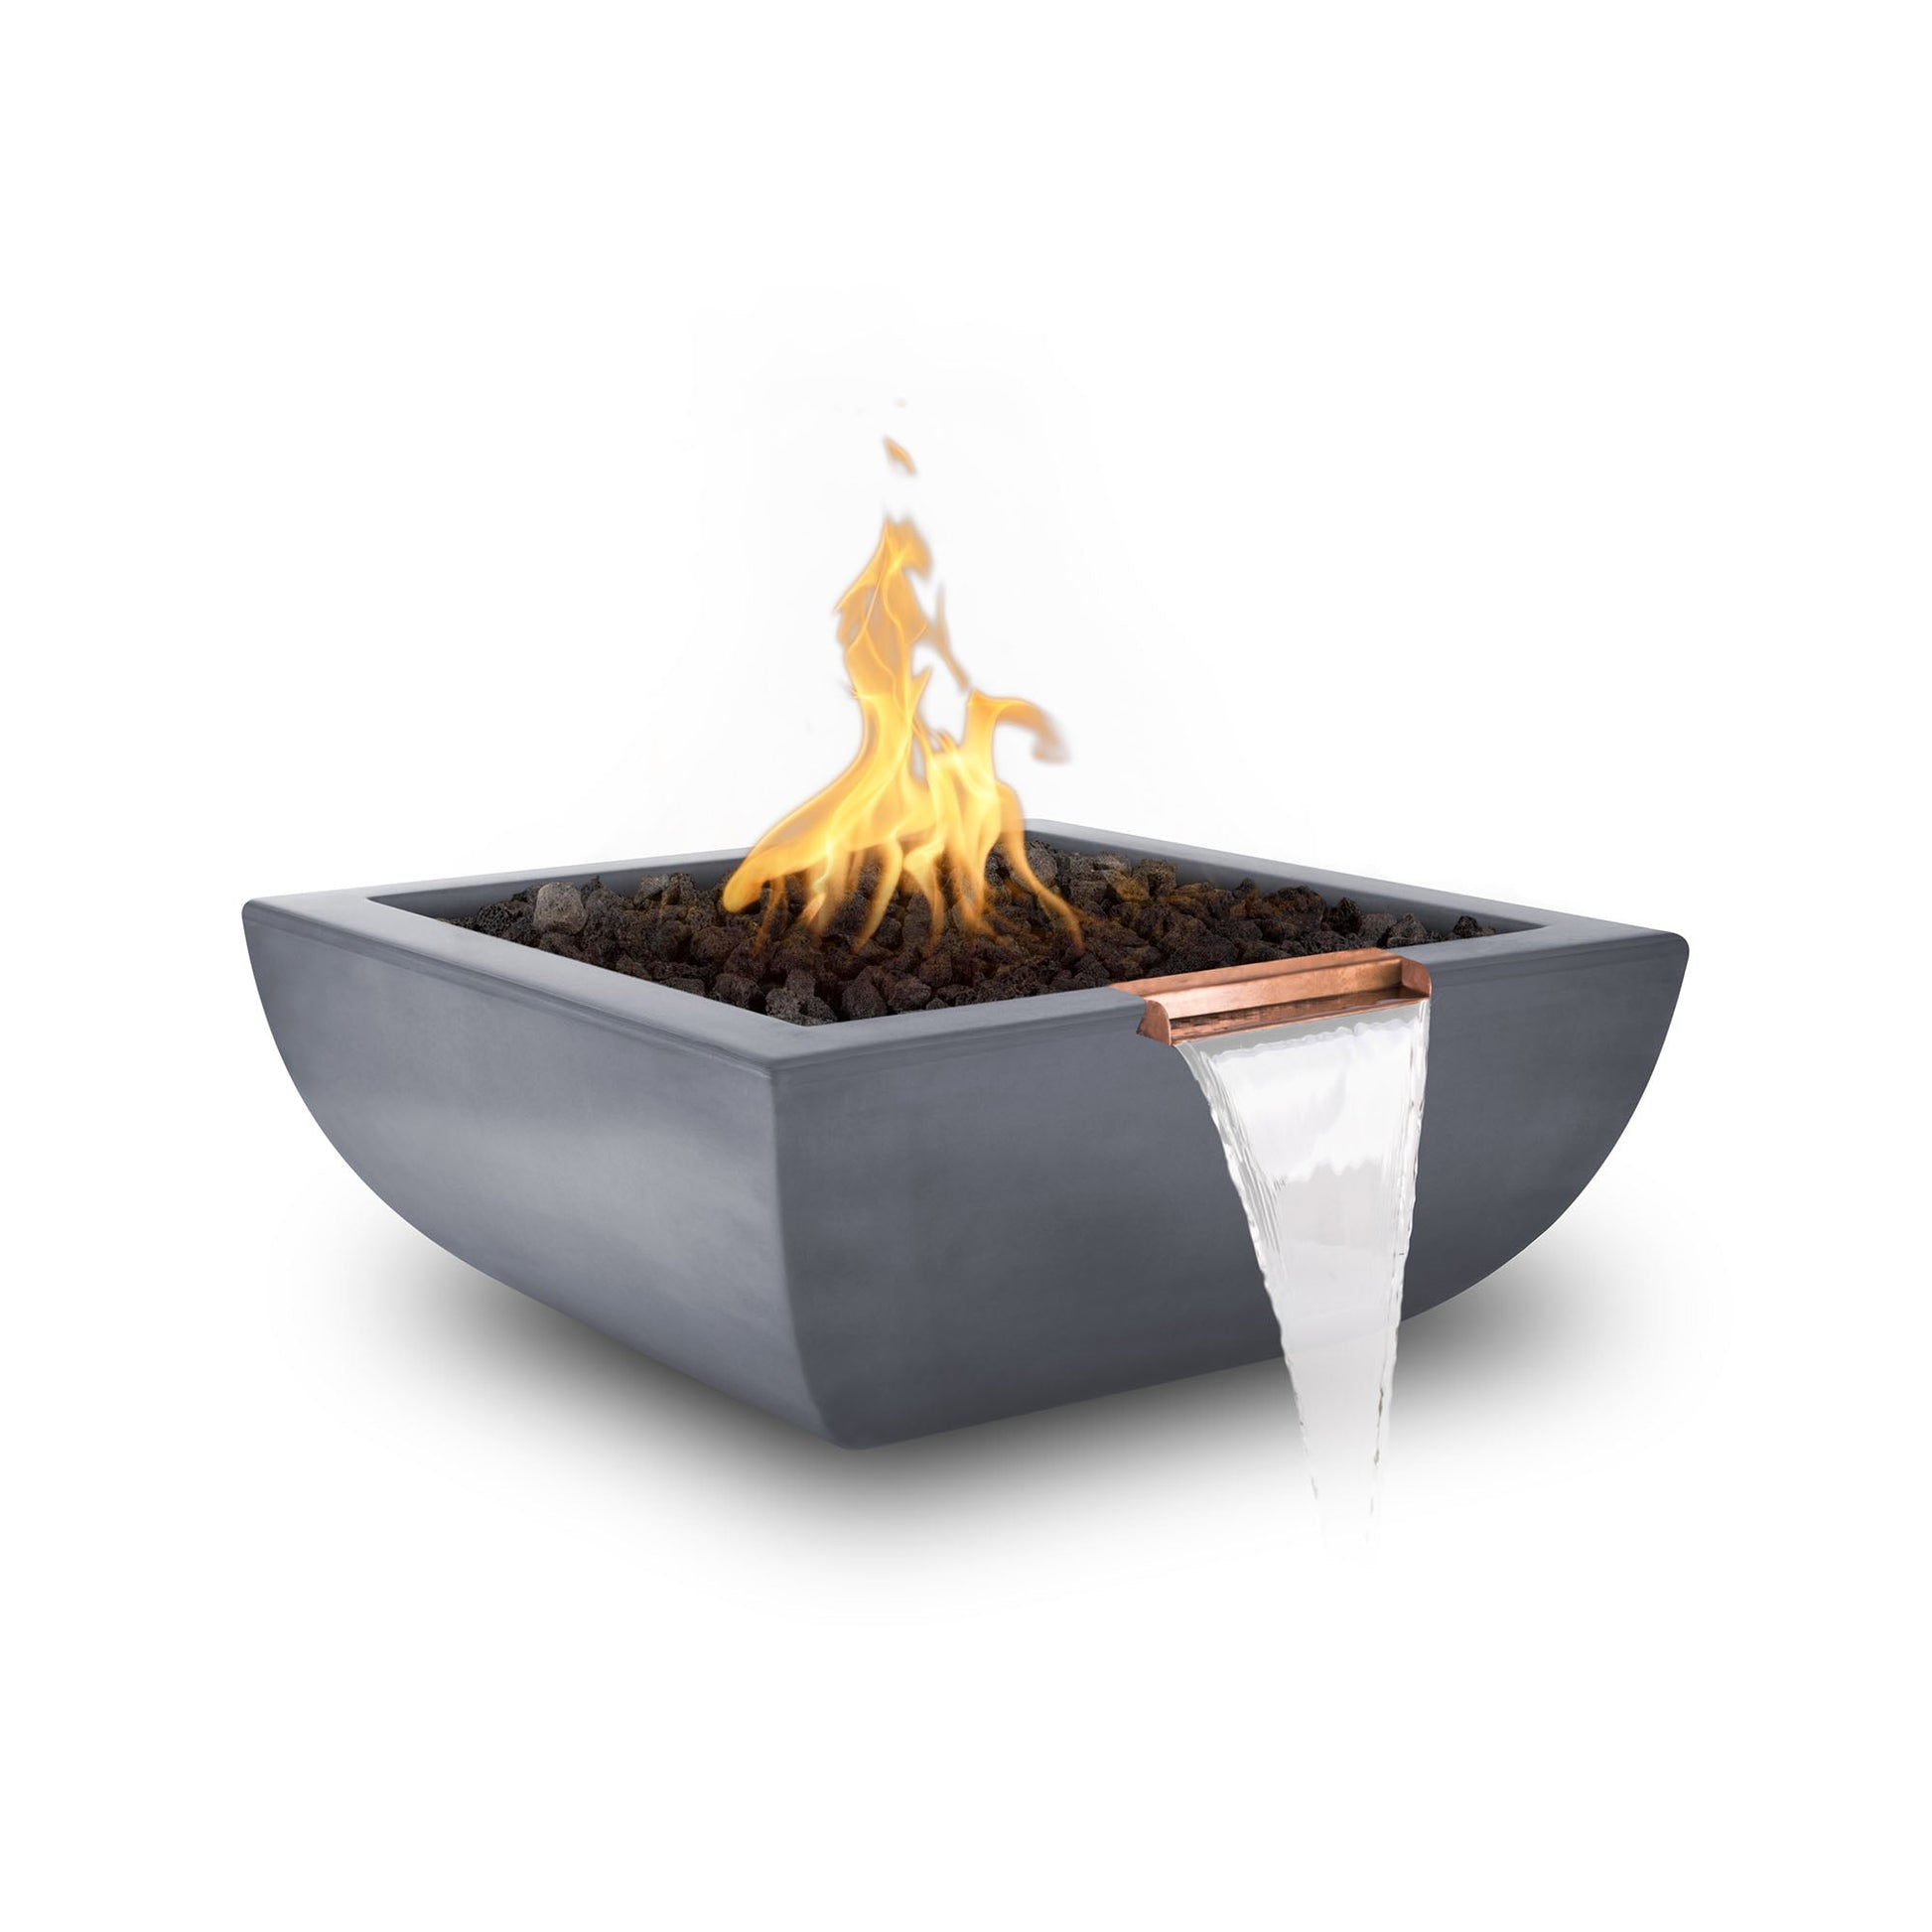 The Outdoor Plus Square Avalon 30" Ash GFRC Concrete Liquid Propane Fire & Water Bowl with Match Lit with Flame Sense Ignition